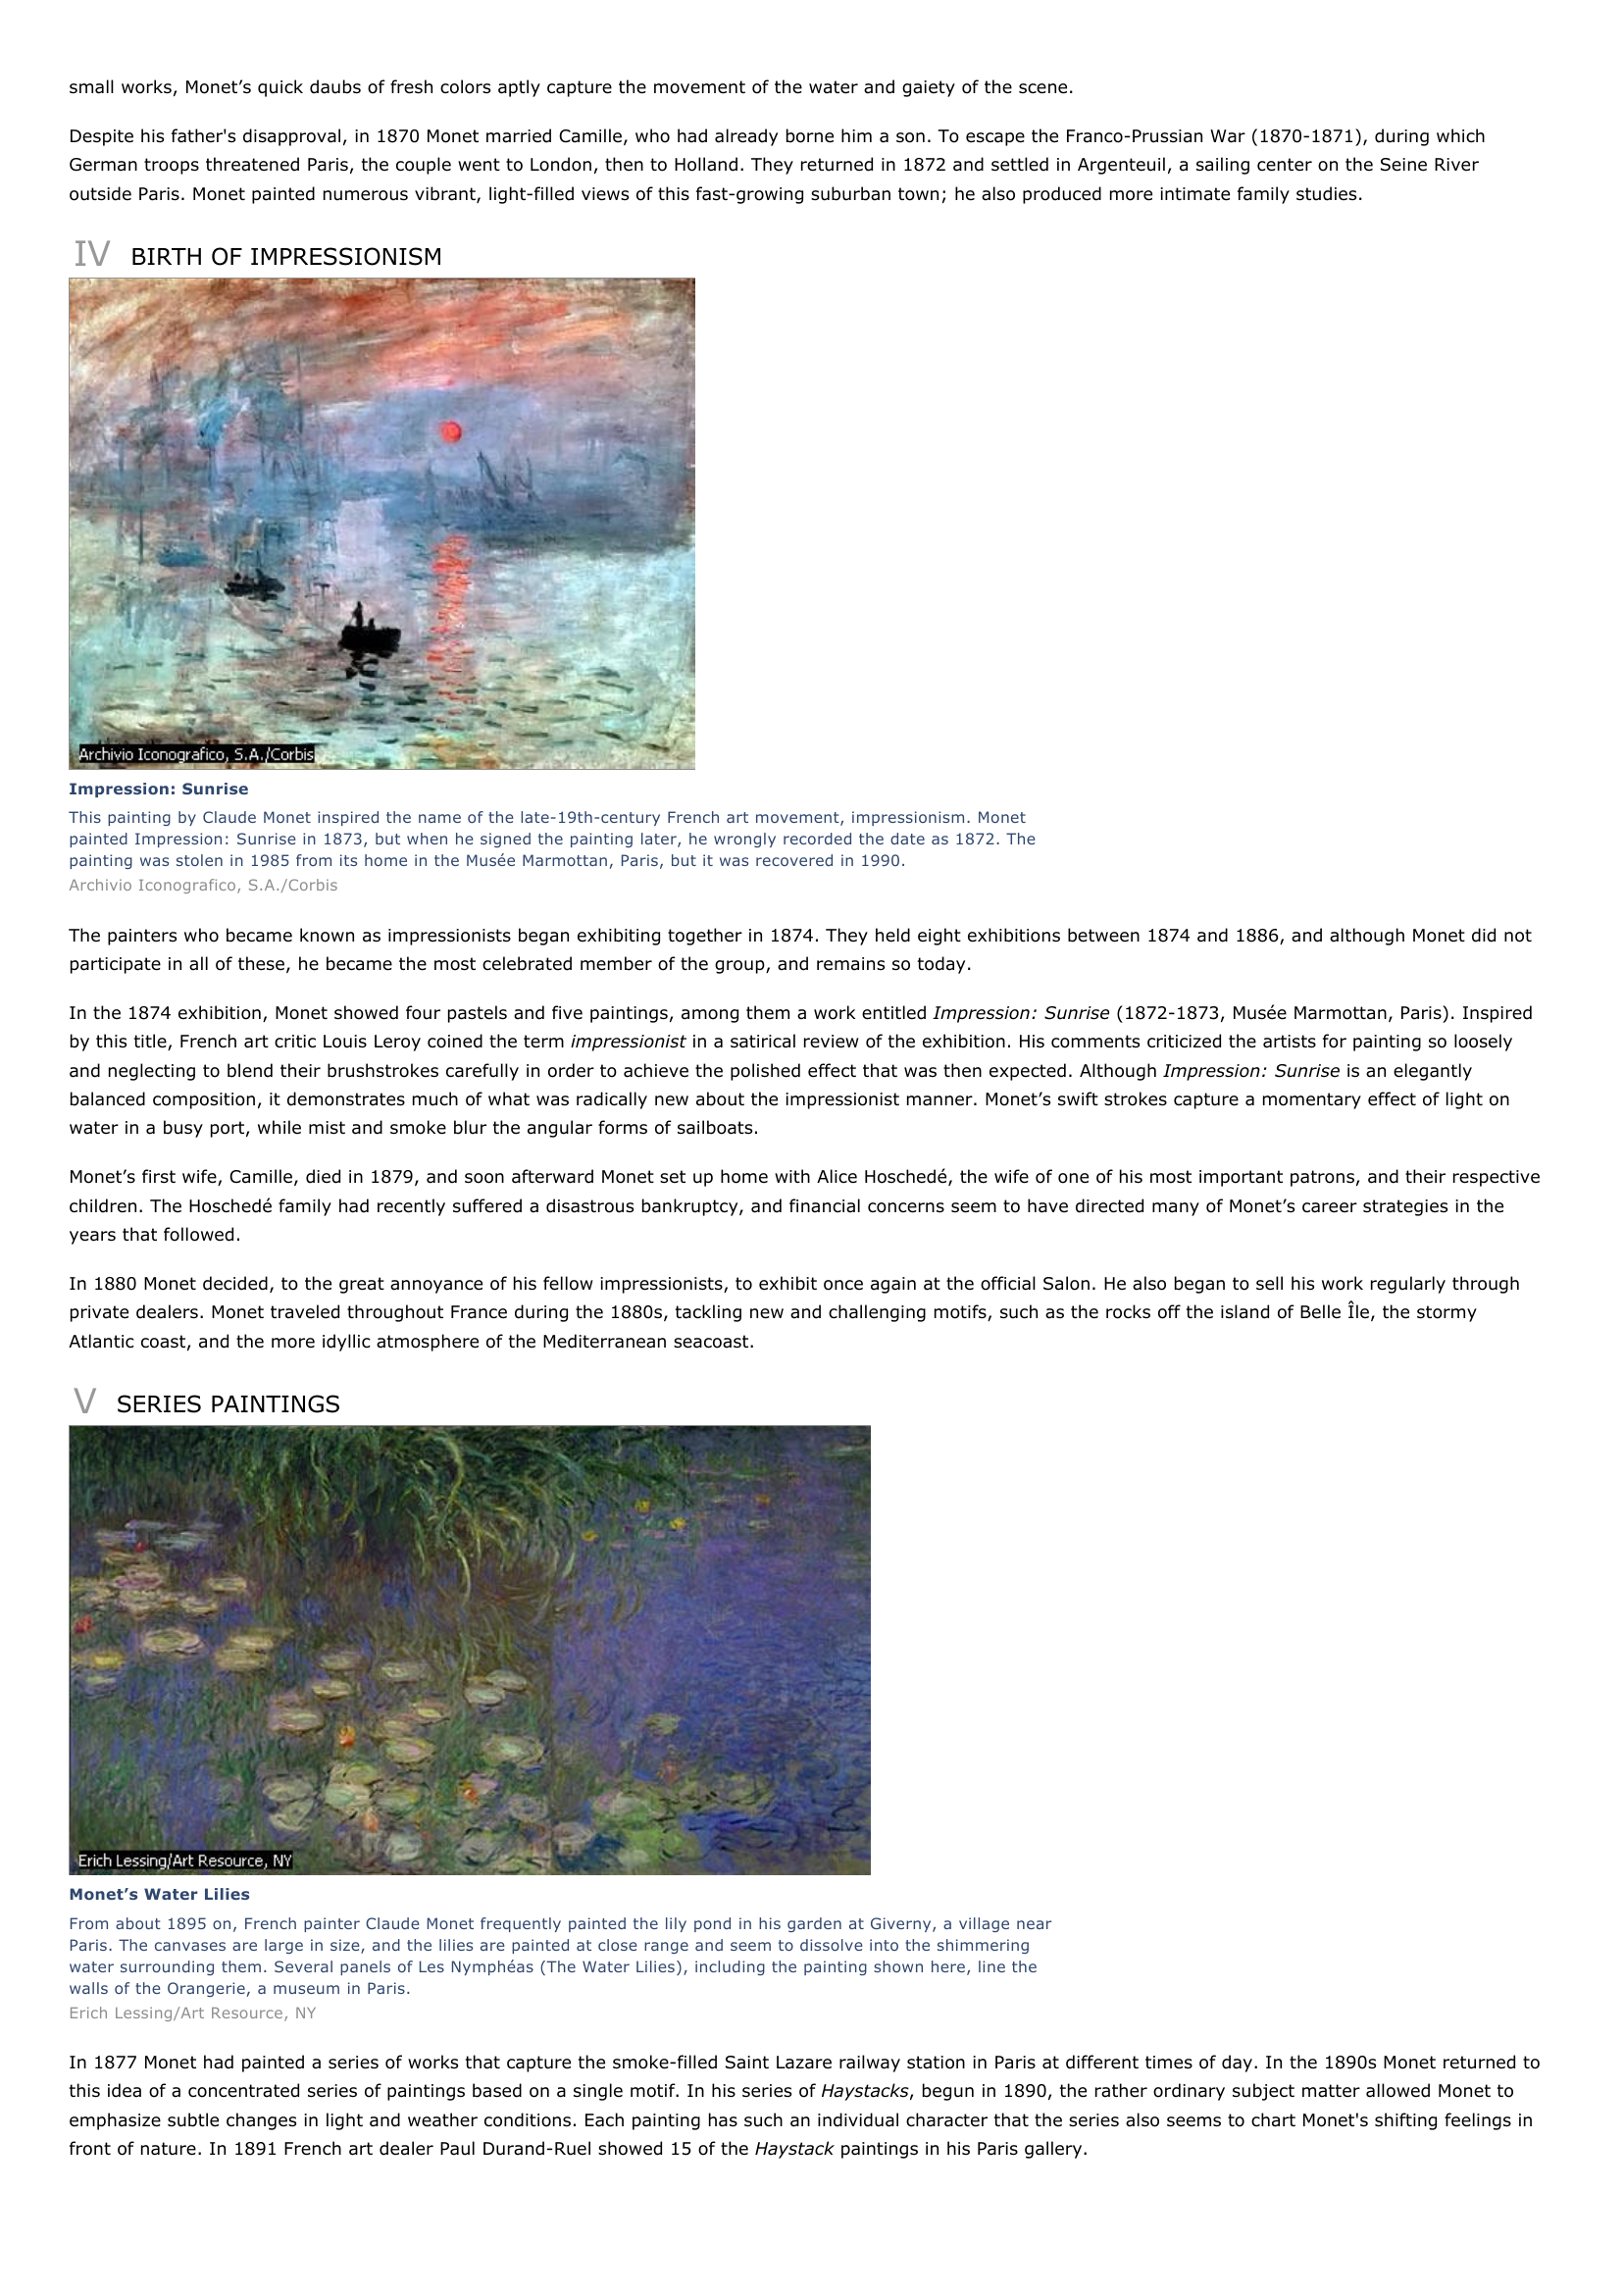 Prévisualisation du document Claude Monet
I

INTRODUCTION

Monet's Gardens at Giverny
From 1890 until his death in 1926, Claude Monet lived and painted in the small village of Giverny, near Paris.